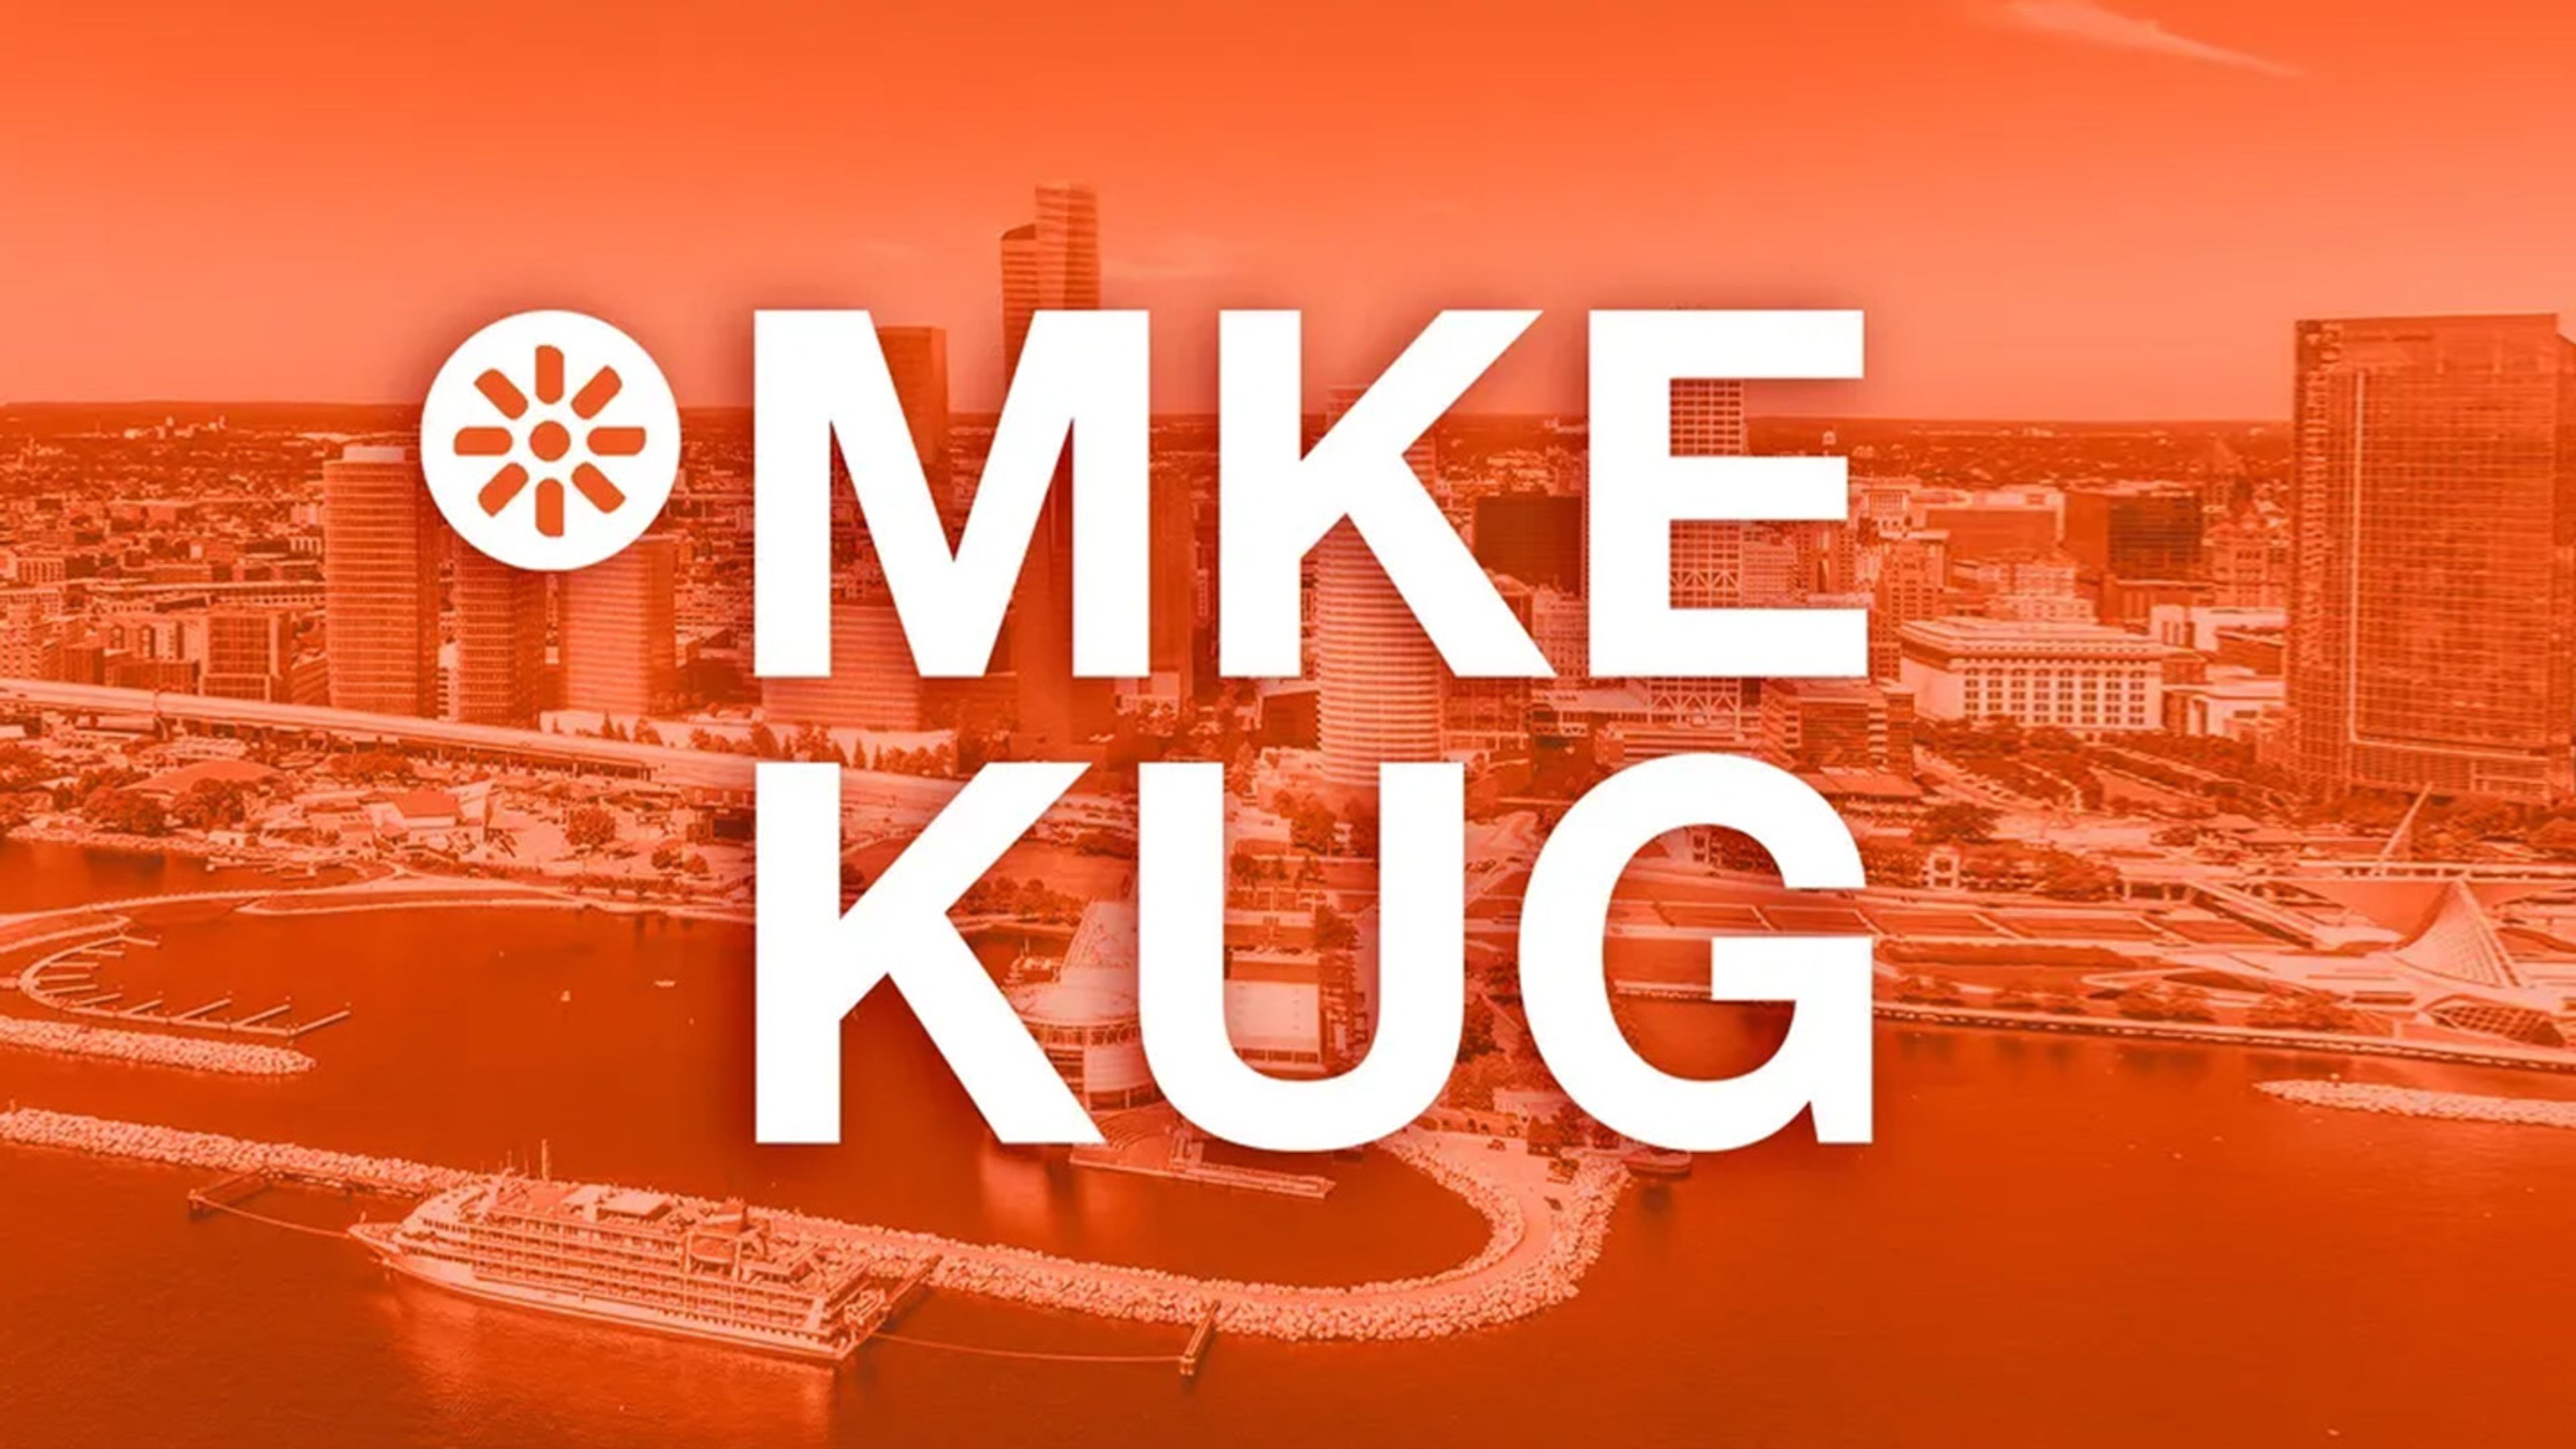 Kentico MKE KUG graphic with city of Milwaukee in the background